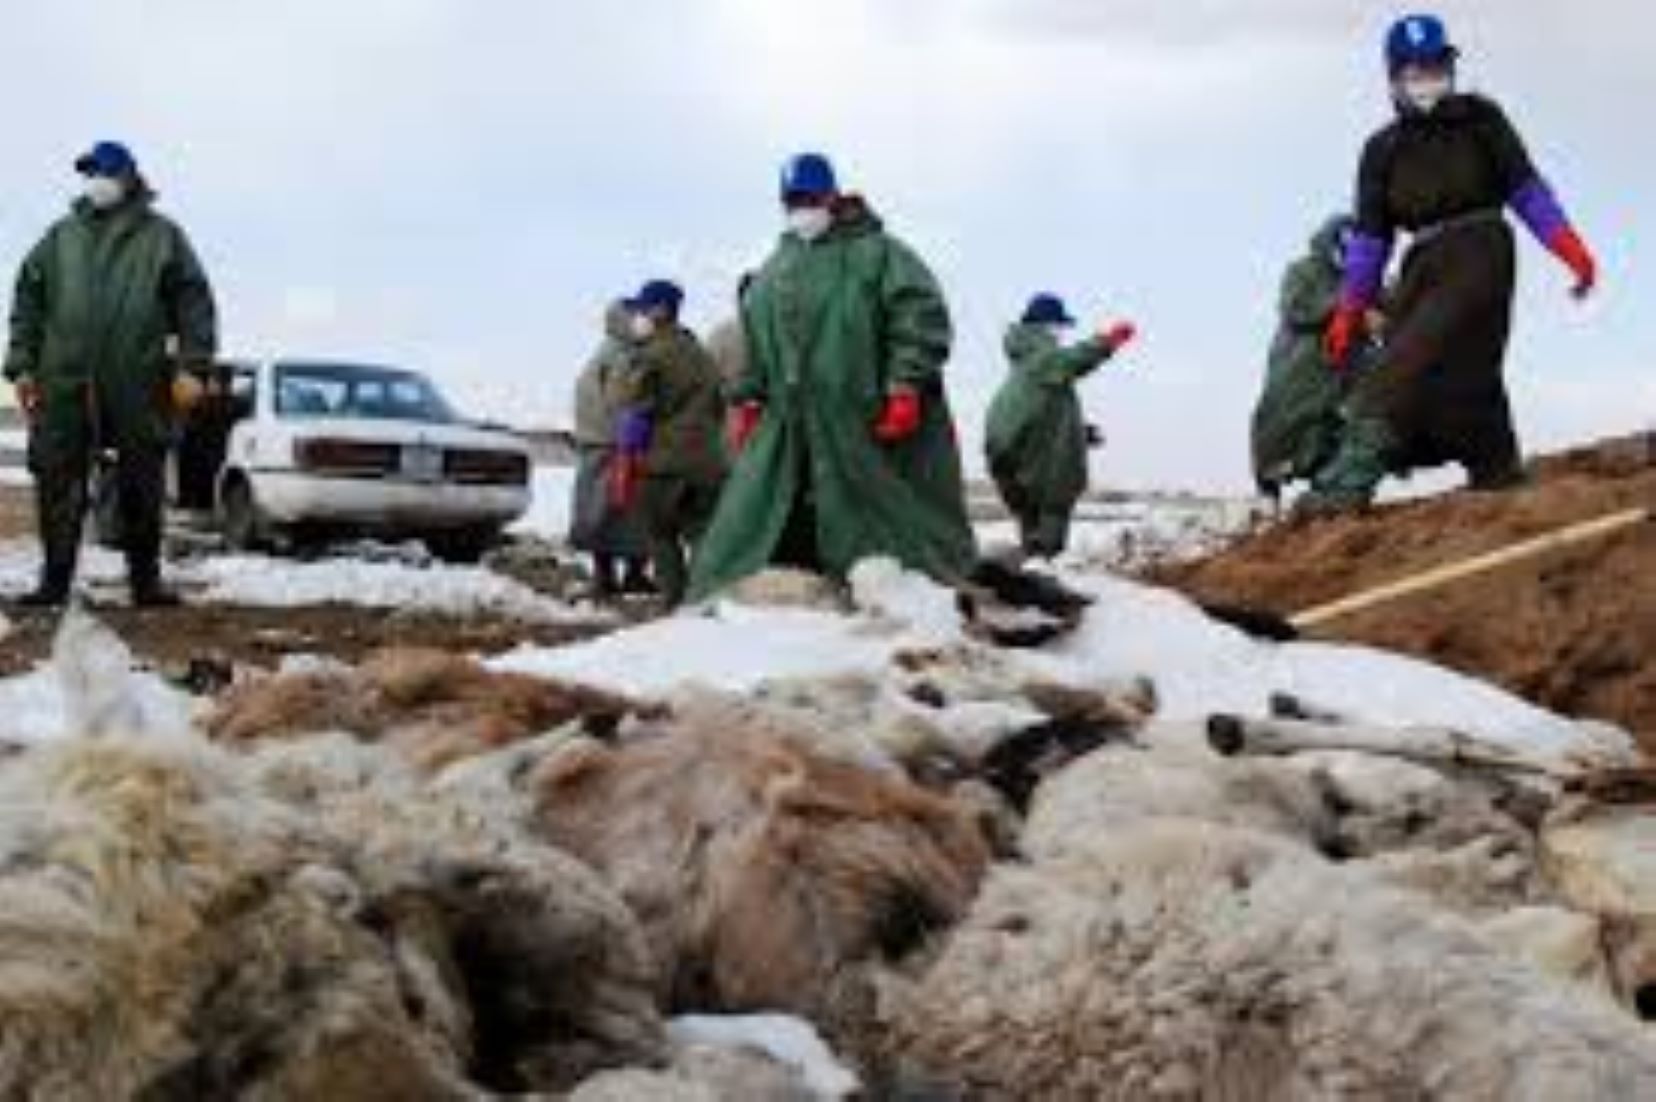 Over Half A Million Livestock Carcasses Destroyed In Mongolia